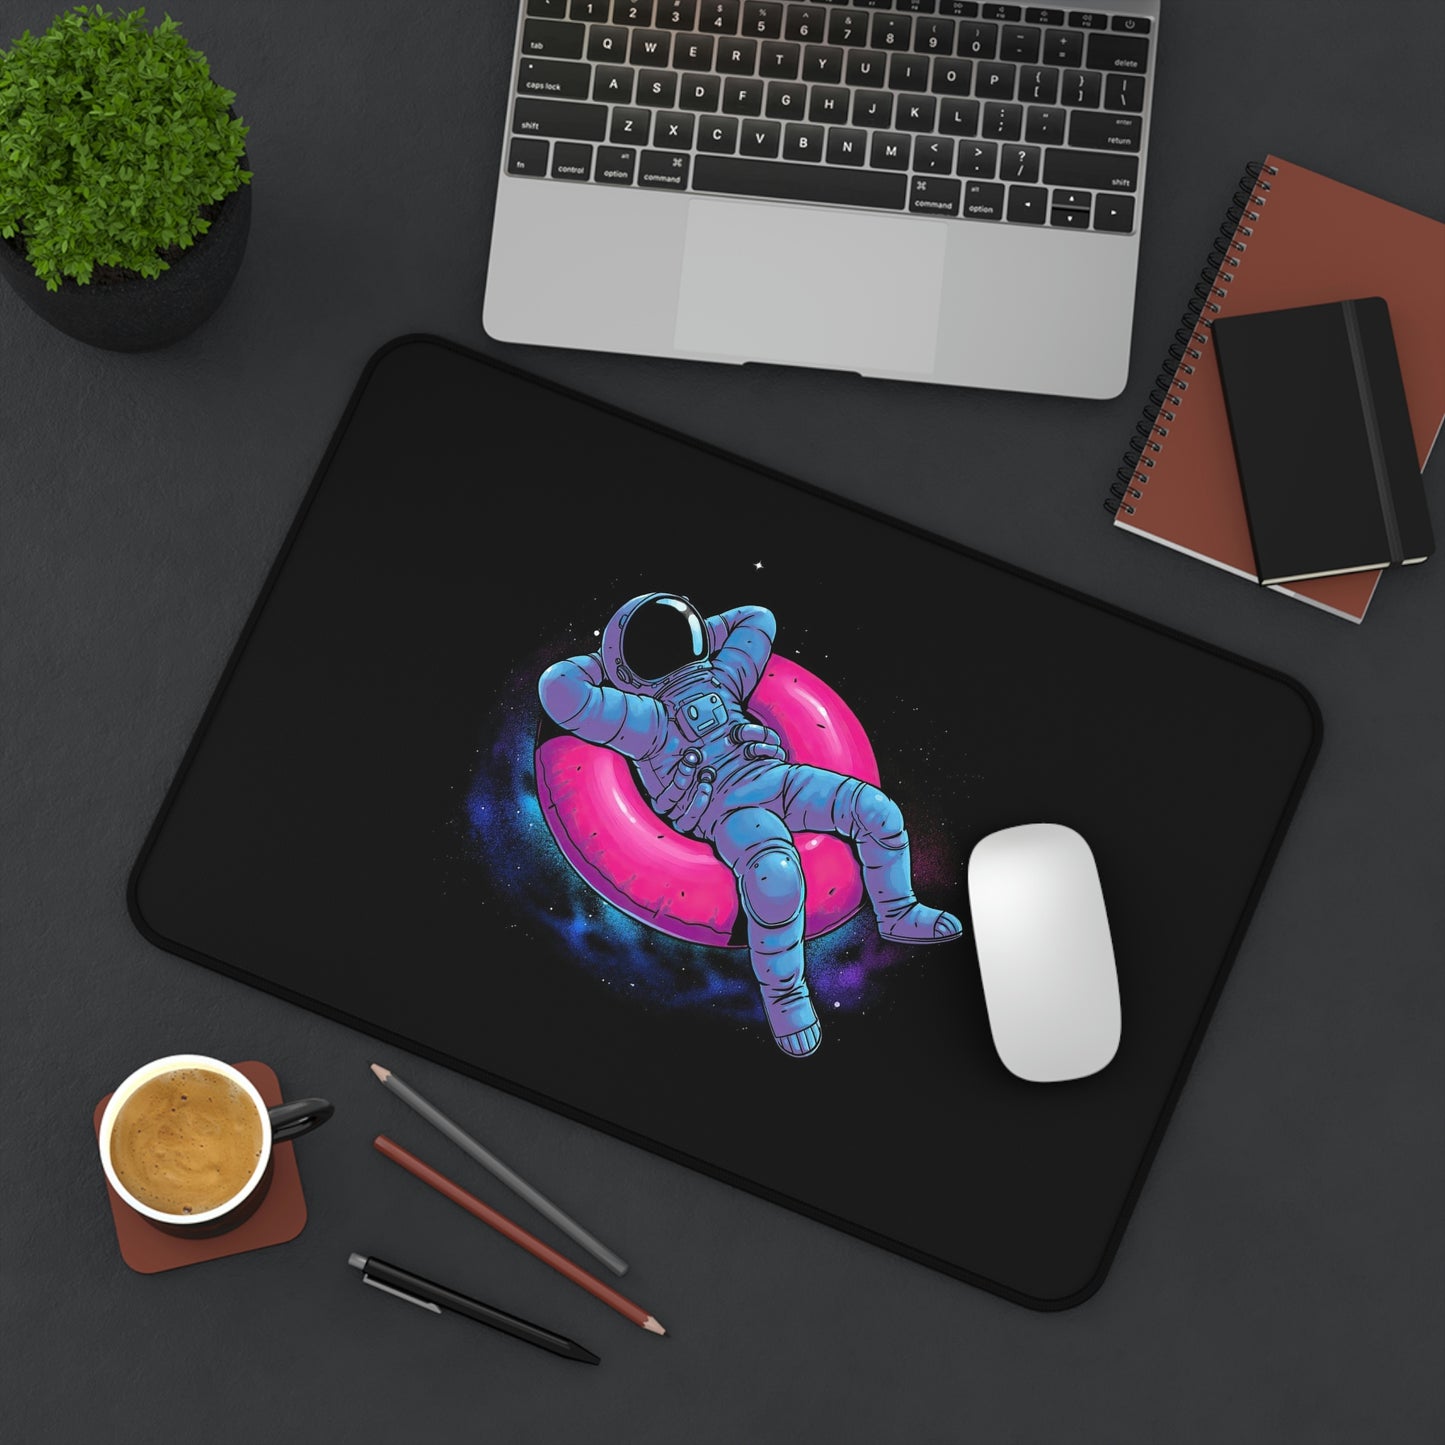 Astronaut Chilling Gaming Mouse Pad